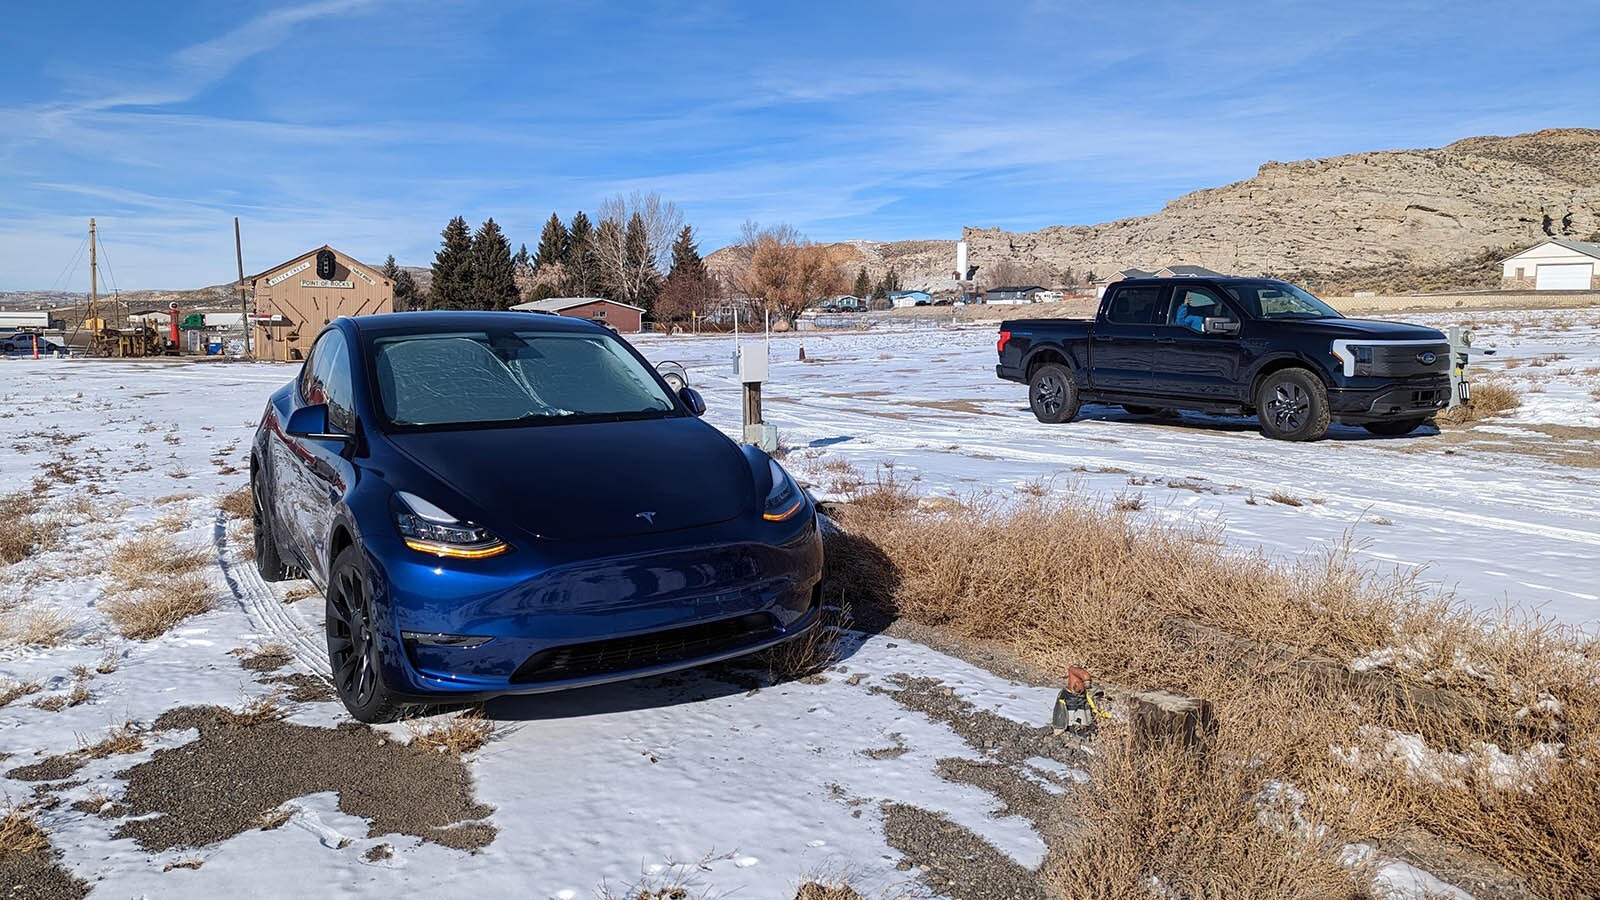 Garrick Johnson's Tesla charges next to a Ford Lightning pickup at an RV park near Rock Springs.